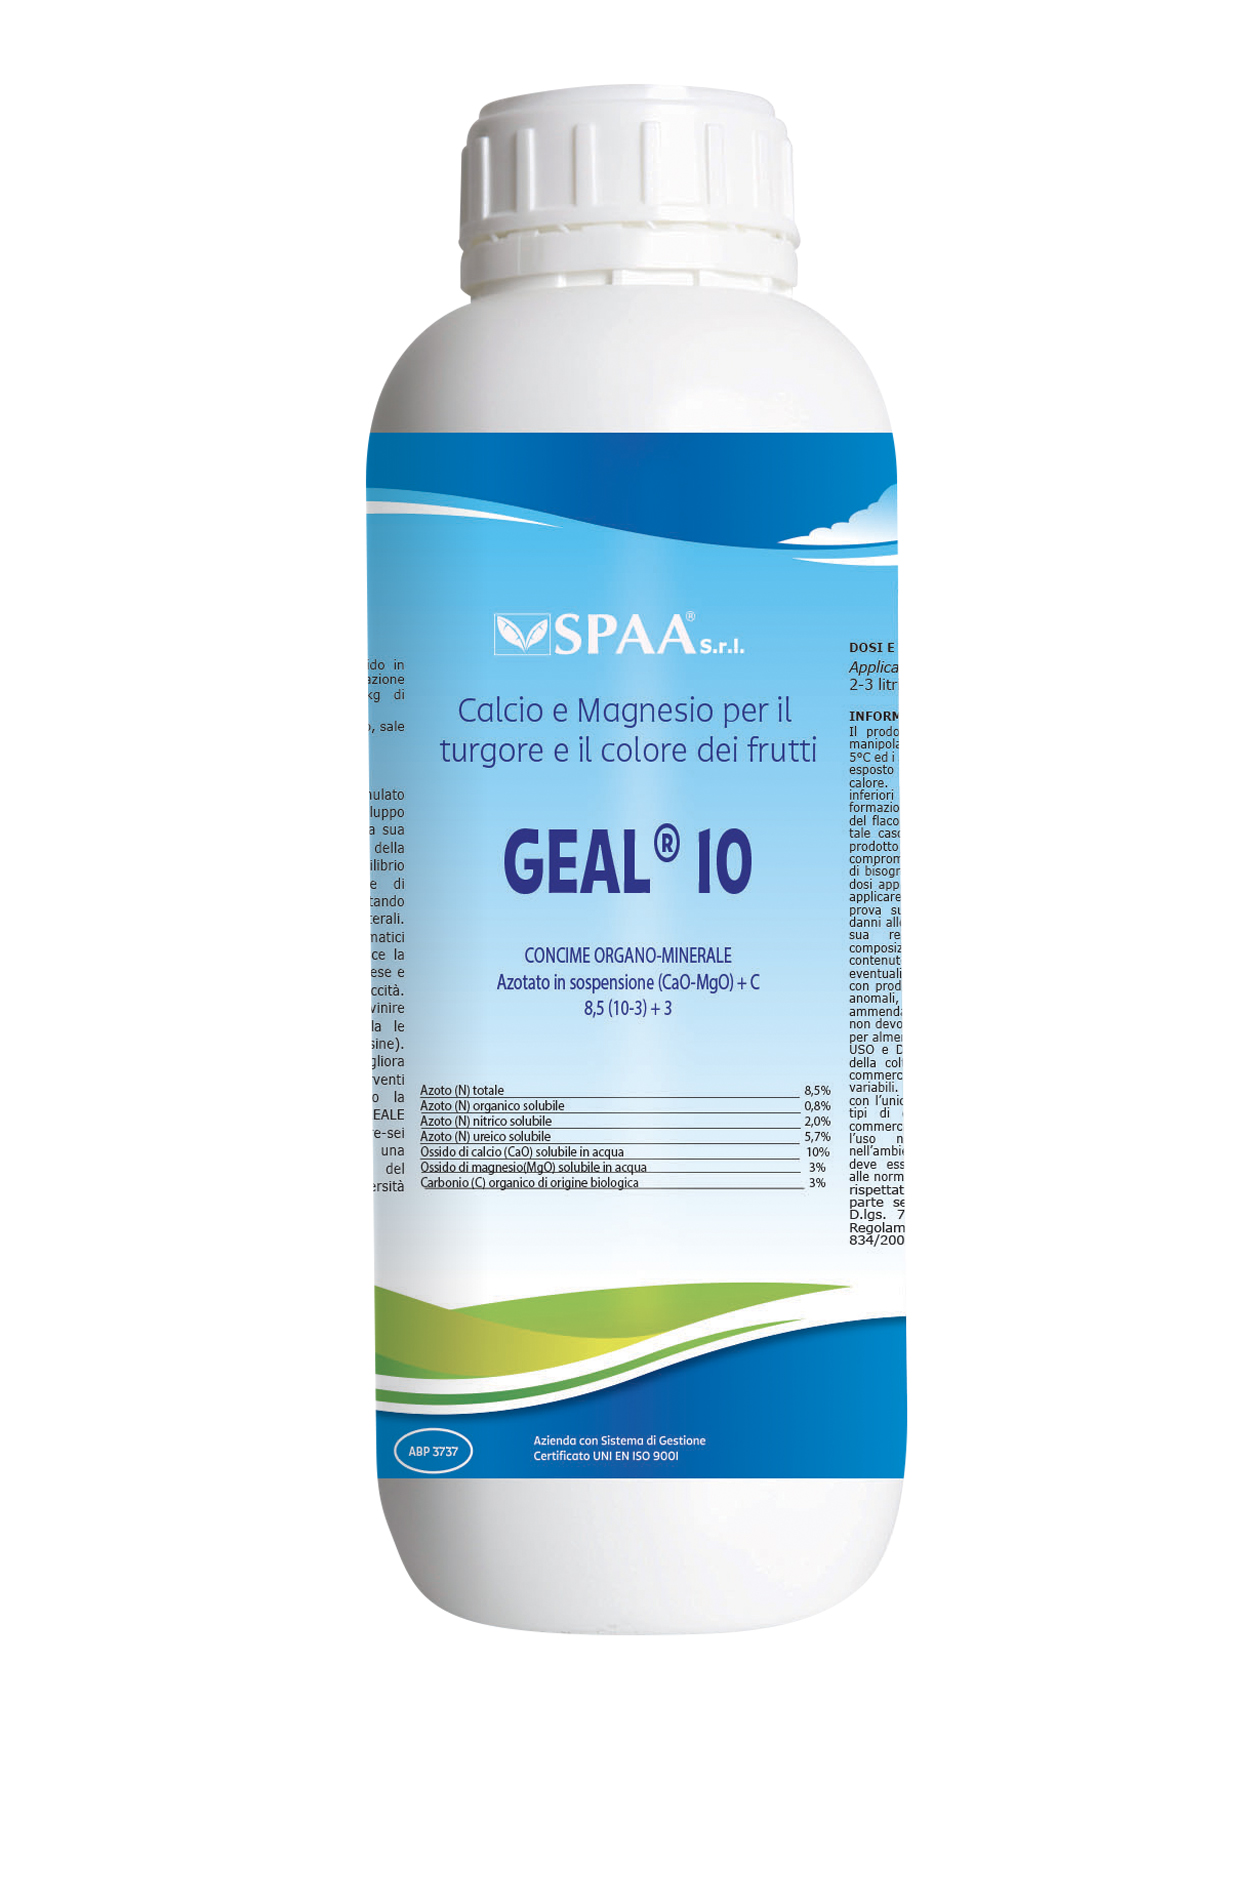 GEAL® 10